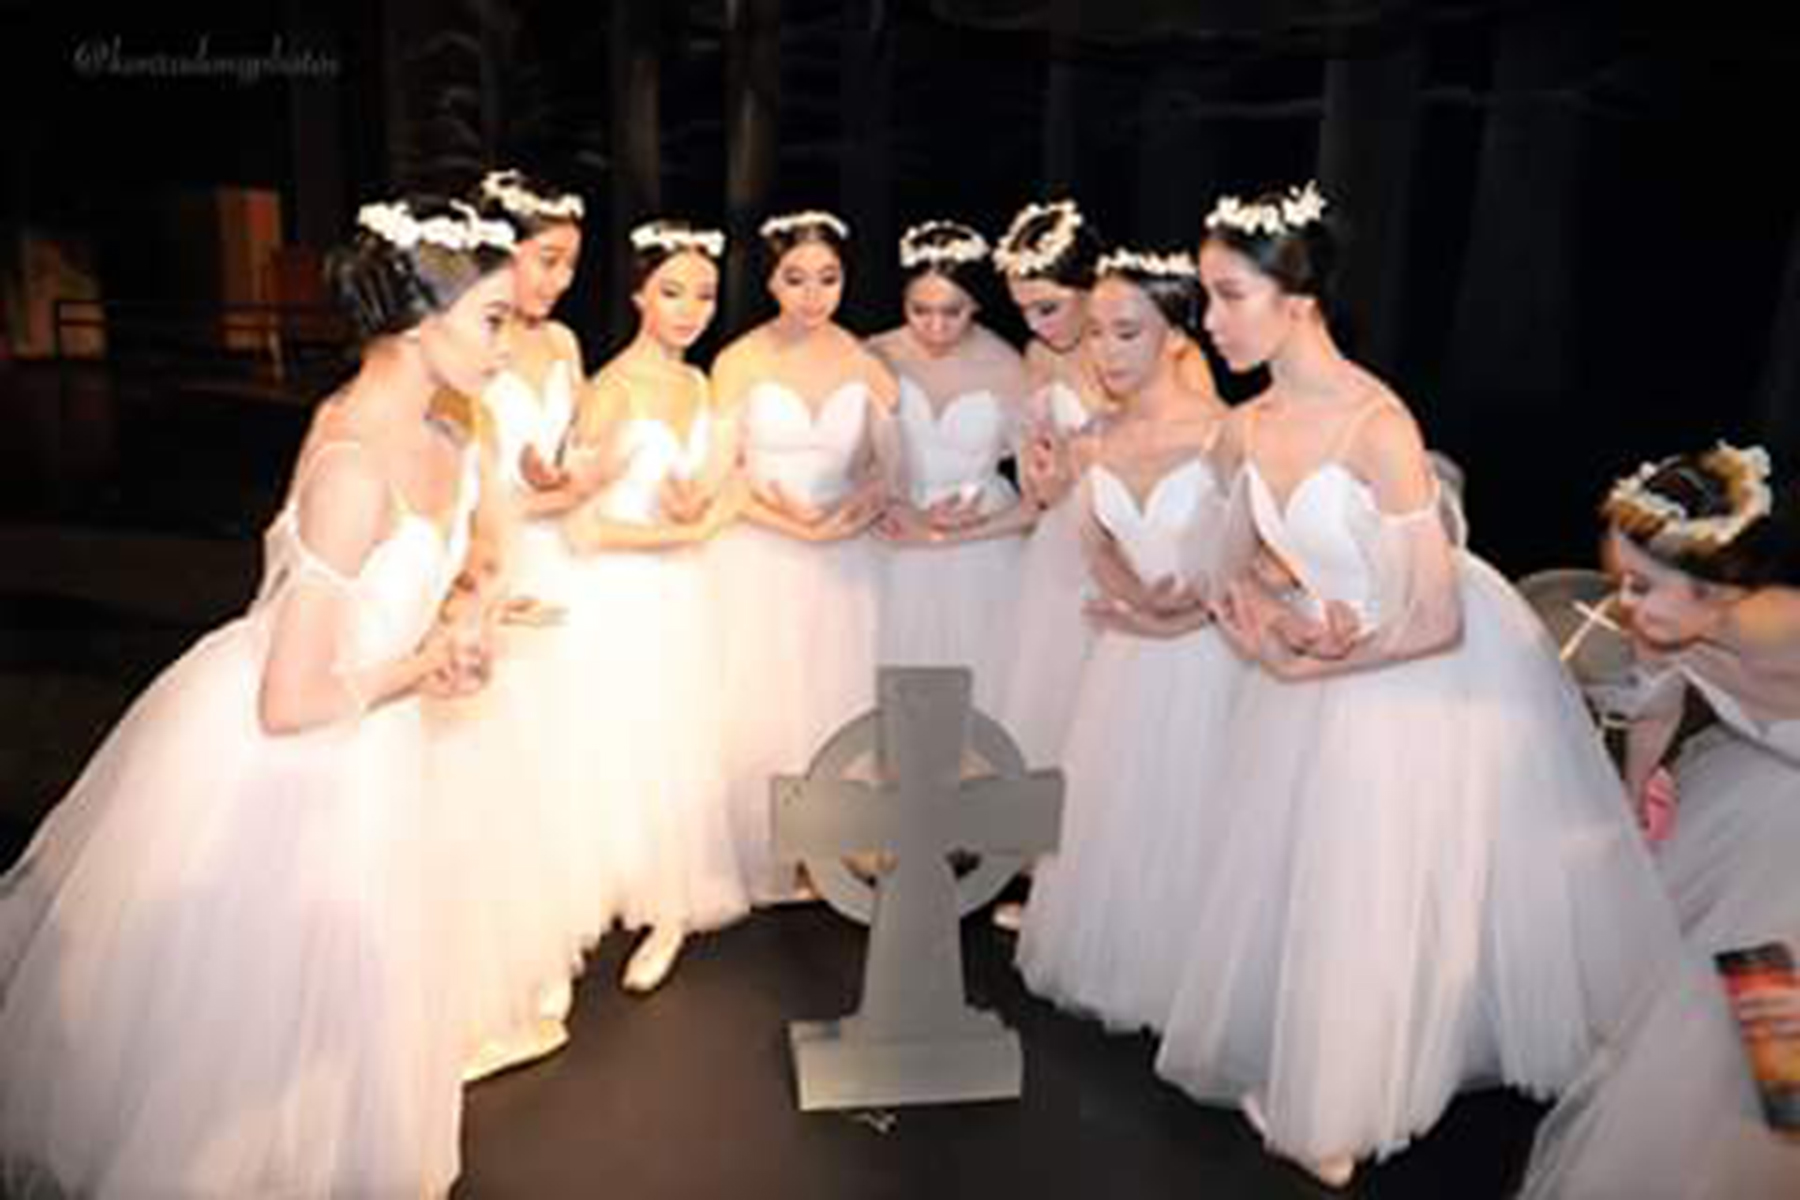 The wilis have a post-Giselle photo taken with an iconic prop. Photo by Konrad Ong